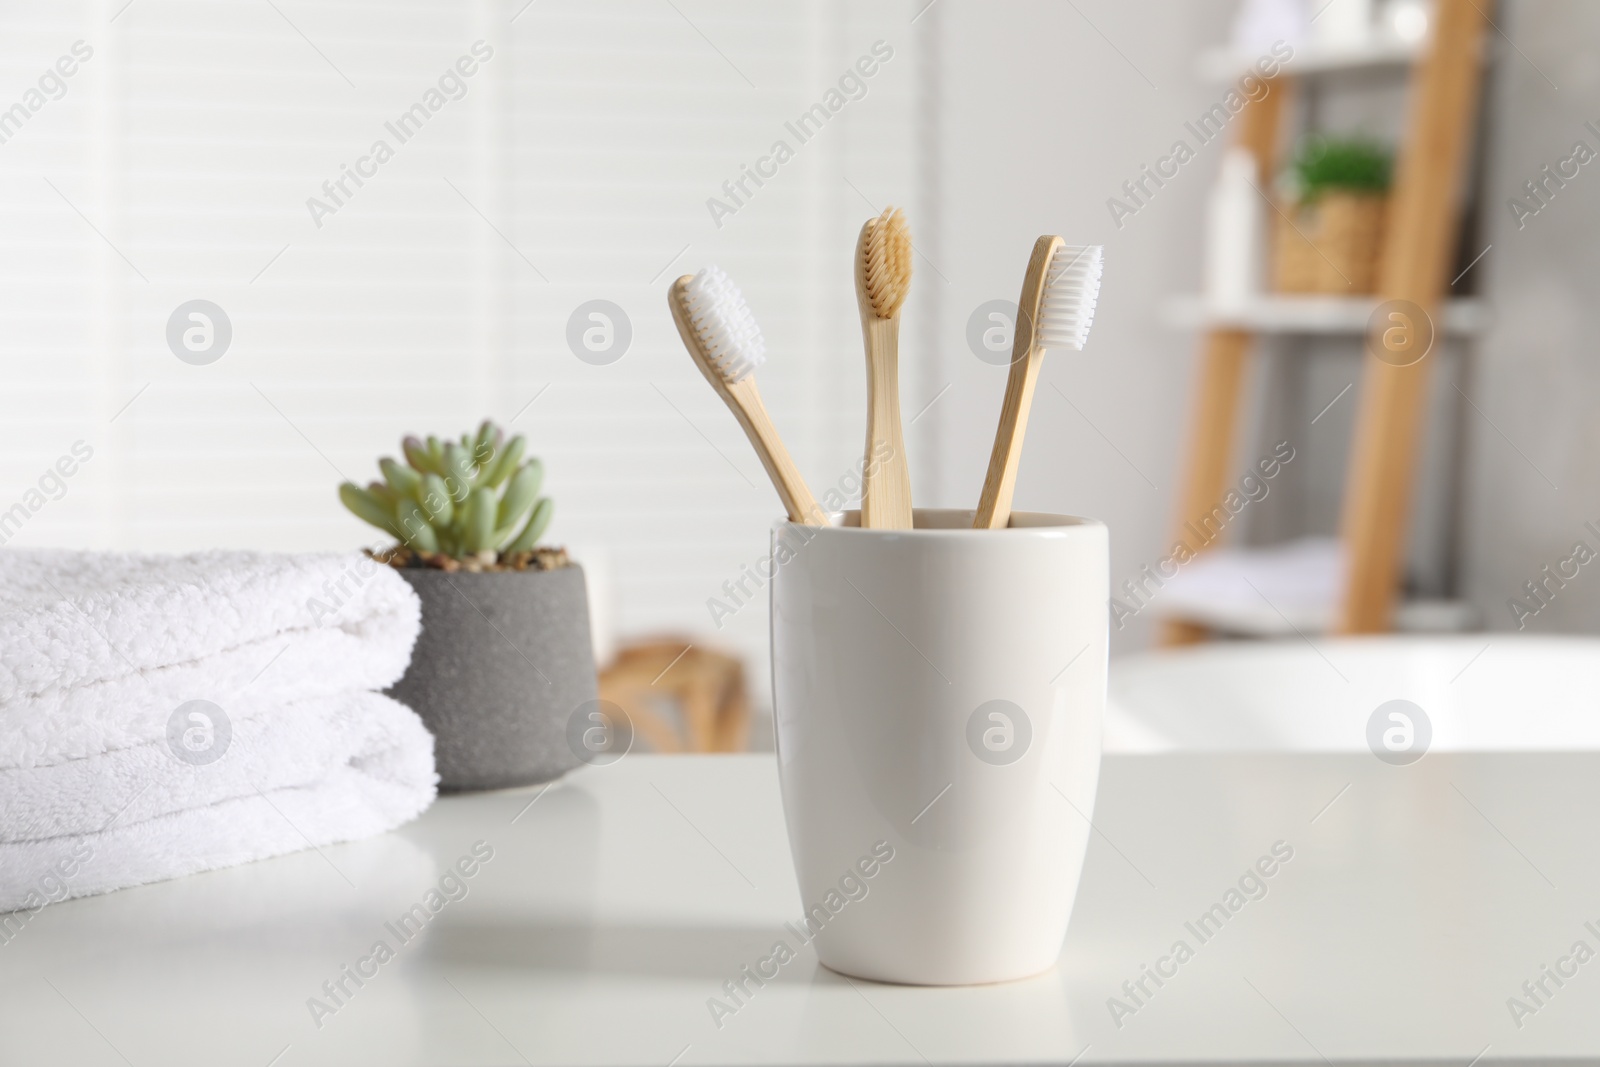 Photo of Holder with bamboo toothbrushes, potted plant and towels on white countertop in bathroom